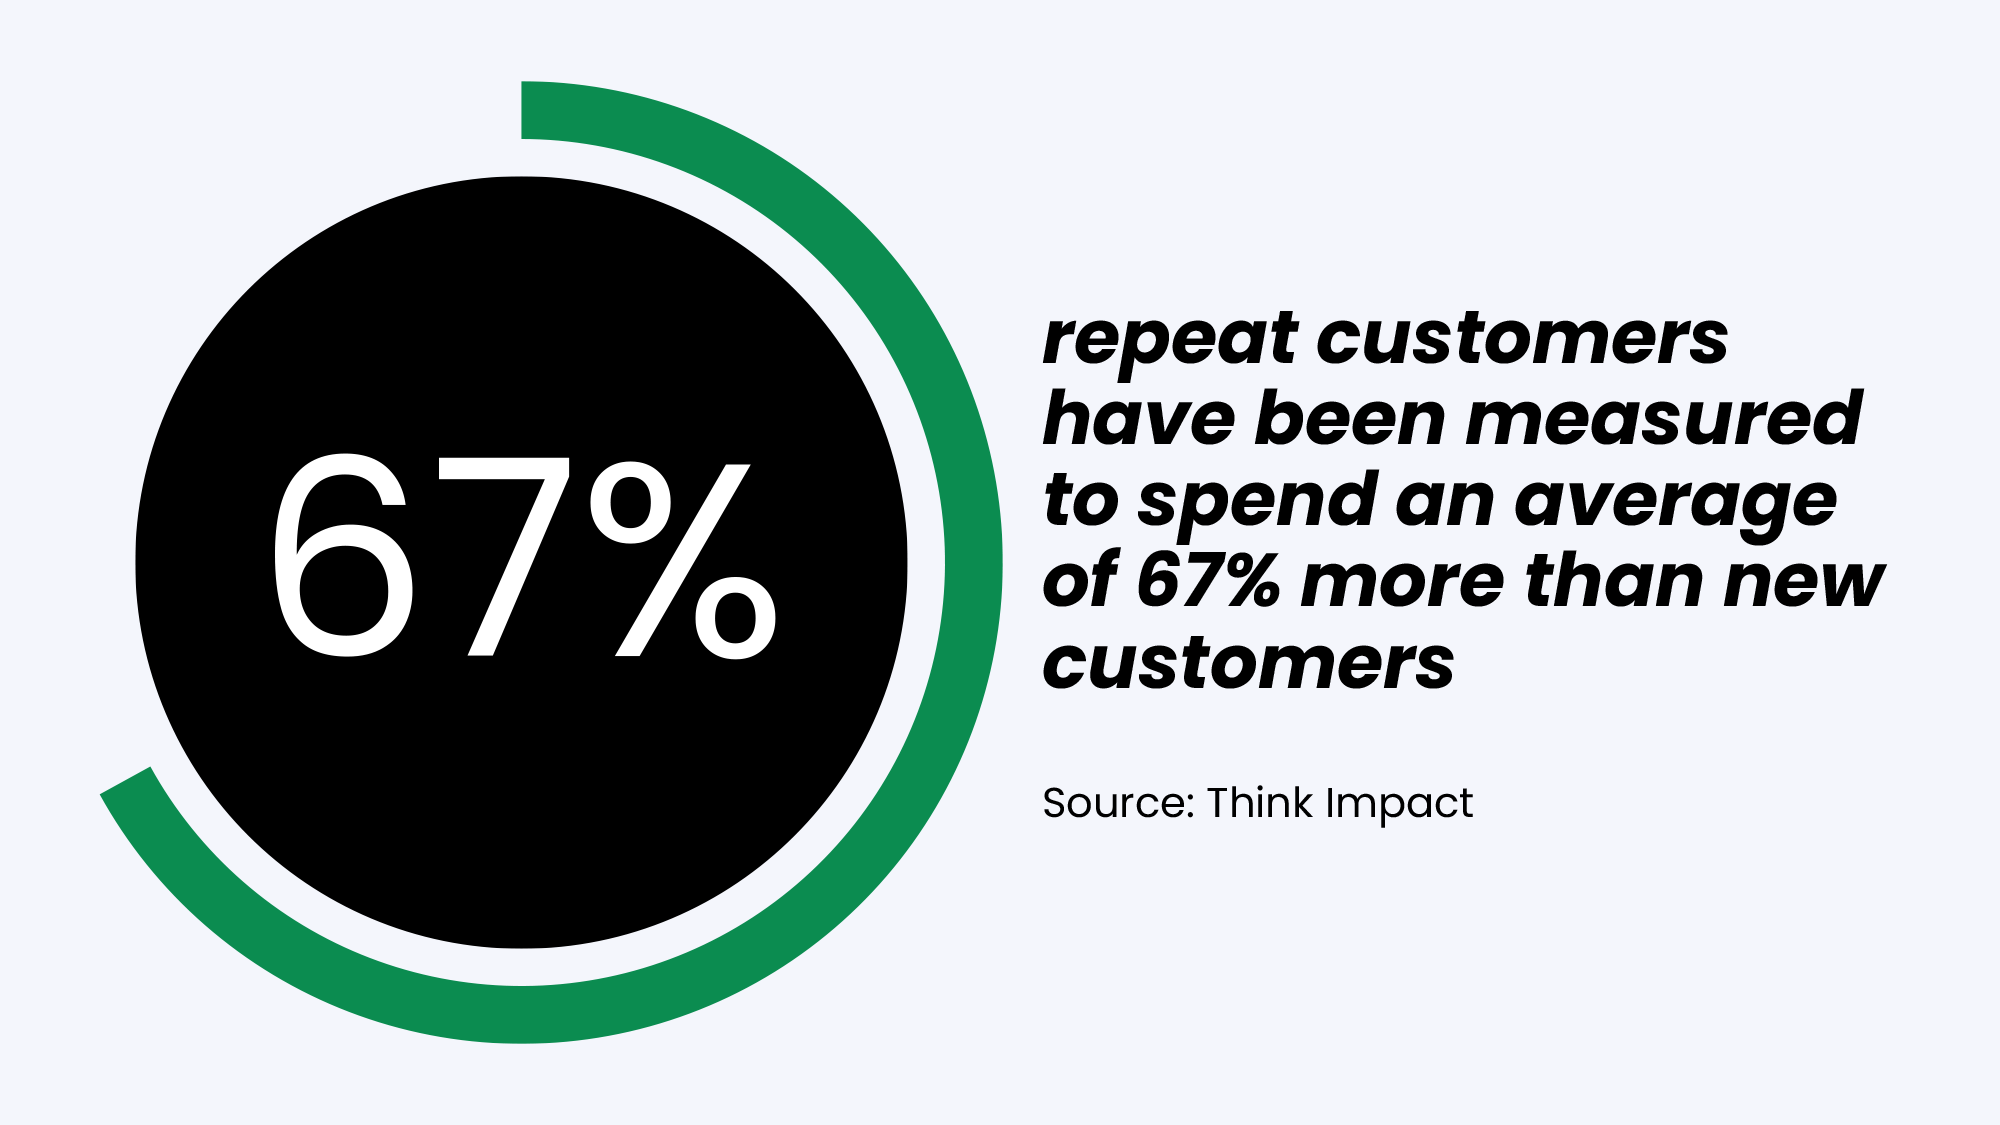 67% repeat customers have been measured to spend an average of 67% more than new customers